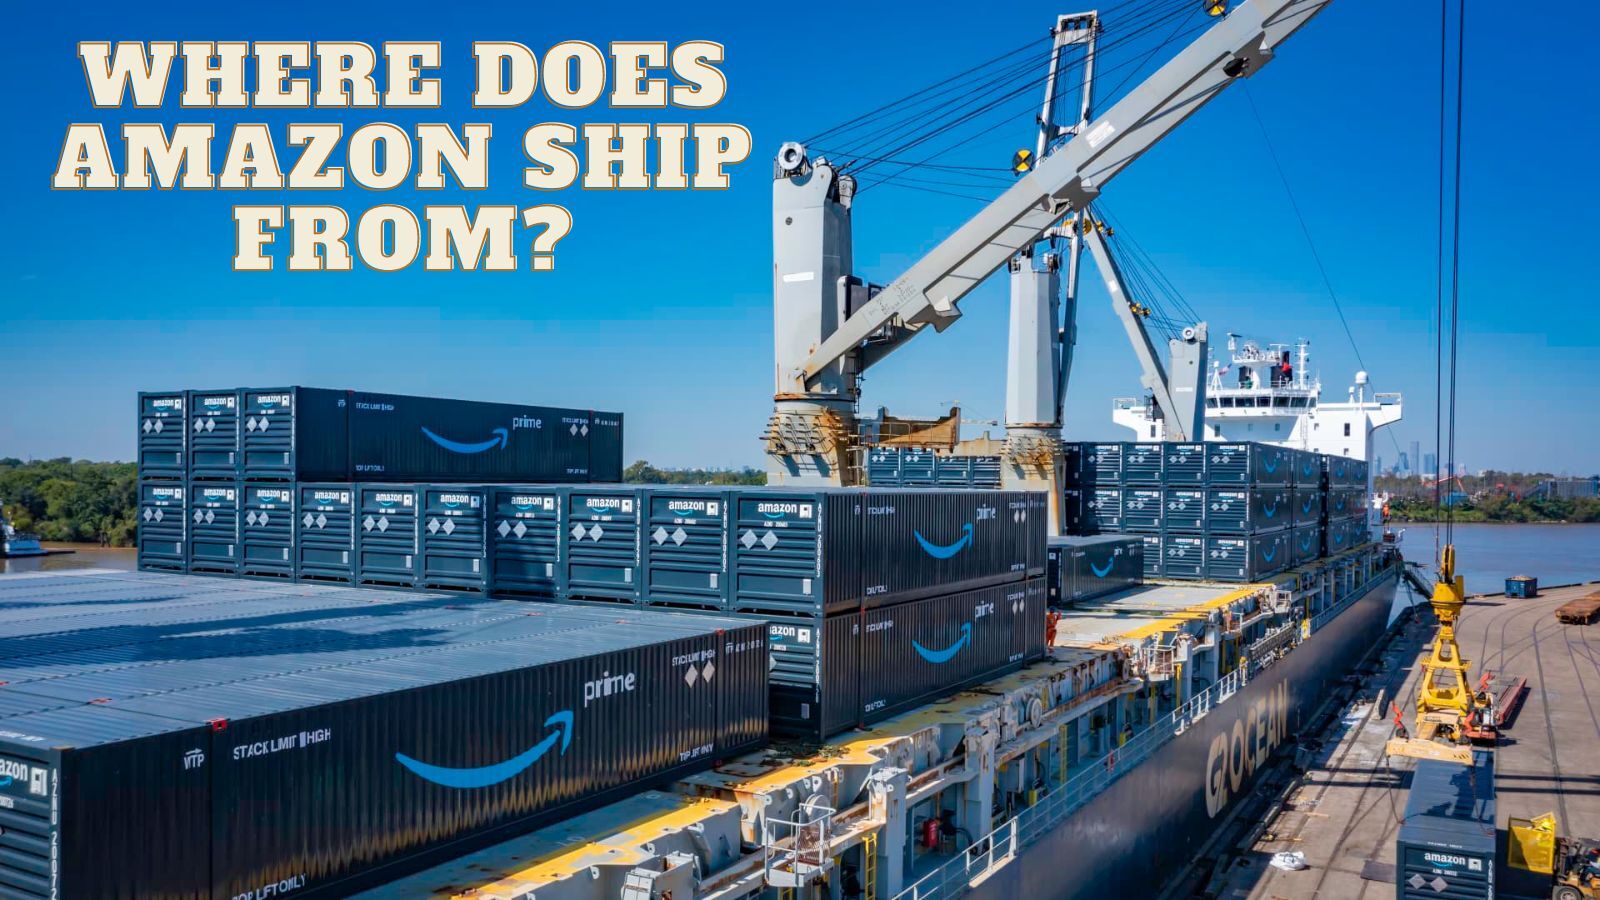 Where Does Amazon Ship From? (The Most Complete Guide To The Whole Internet)